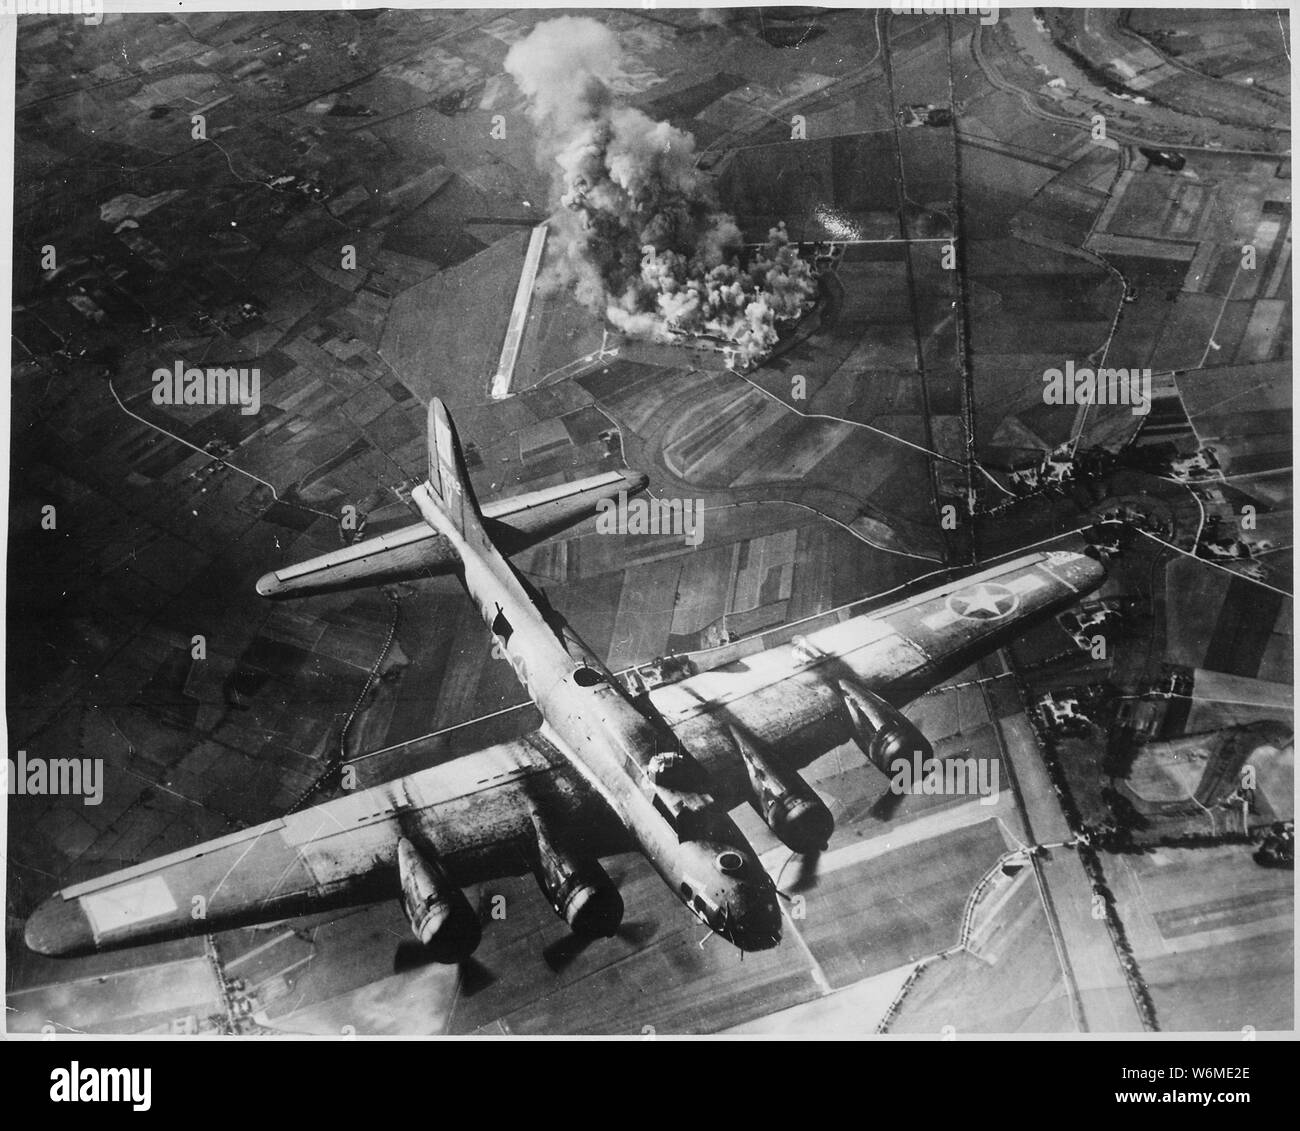 The first big raid by the 8th Air Force was on a Focke Wulf plant at Marienburg. Coming back, the Germans were up in full force and we lost at least 80 ships-800 men, many of them pals. Army Air Forces.; General notes:  Use War and Conflict Number 1087 when ordering a reproduction or requesting information about this image. Stock Photo